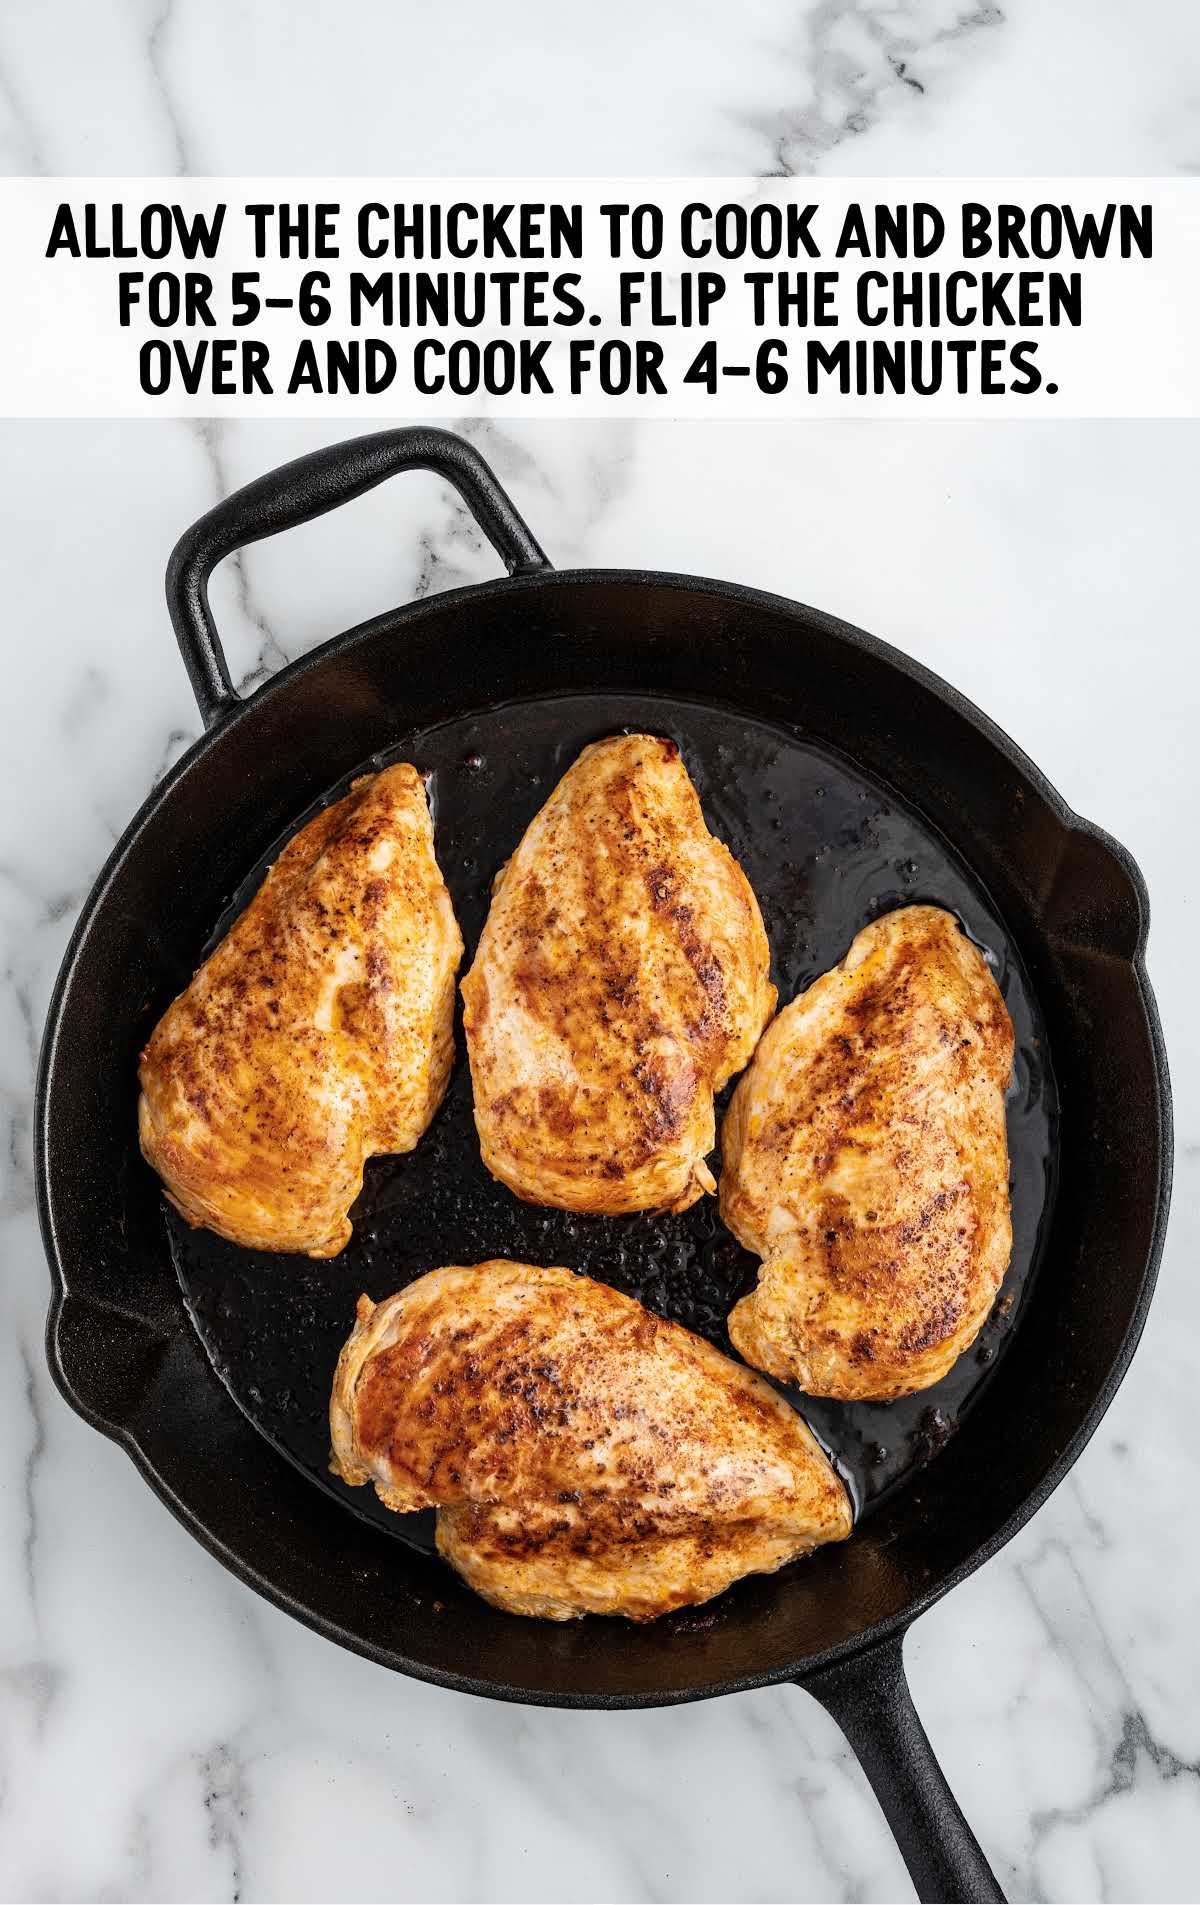 chicken cooked and browned for 4-6 minutes